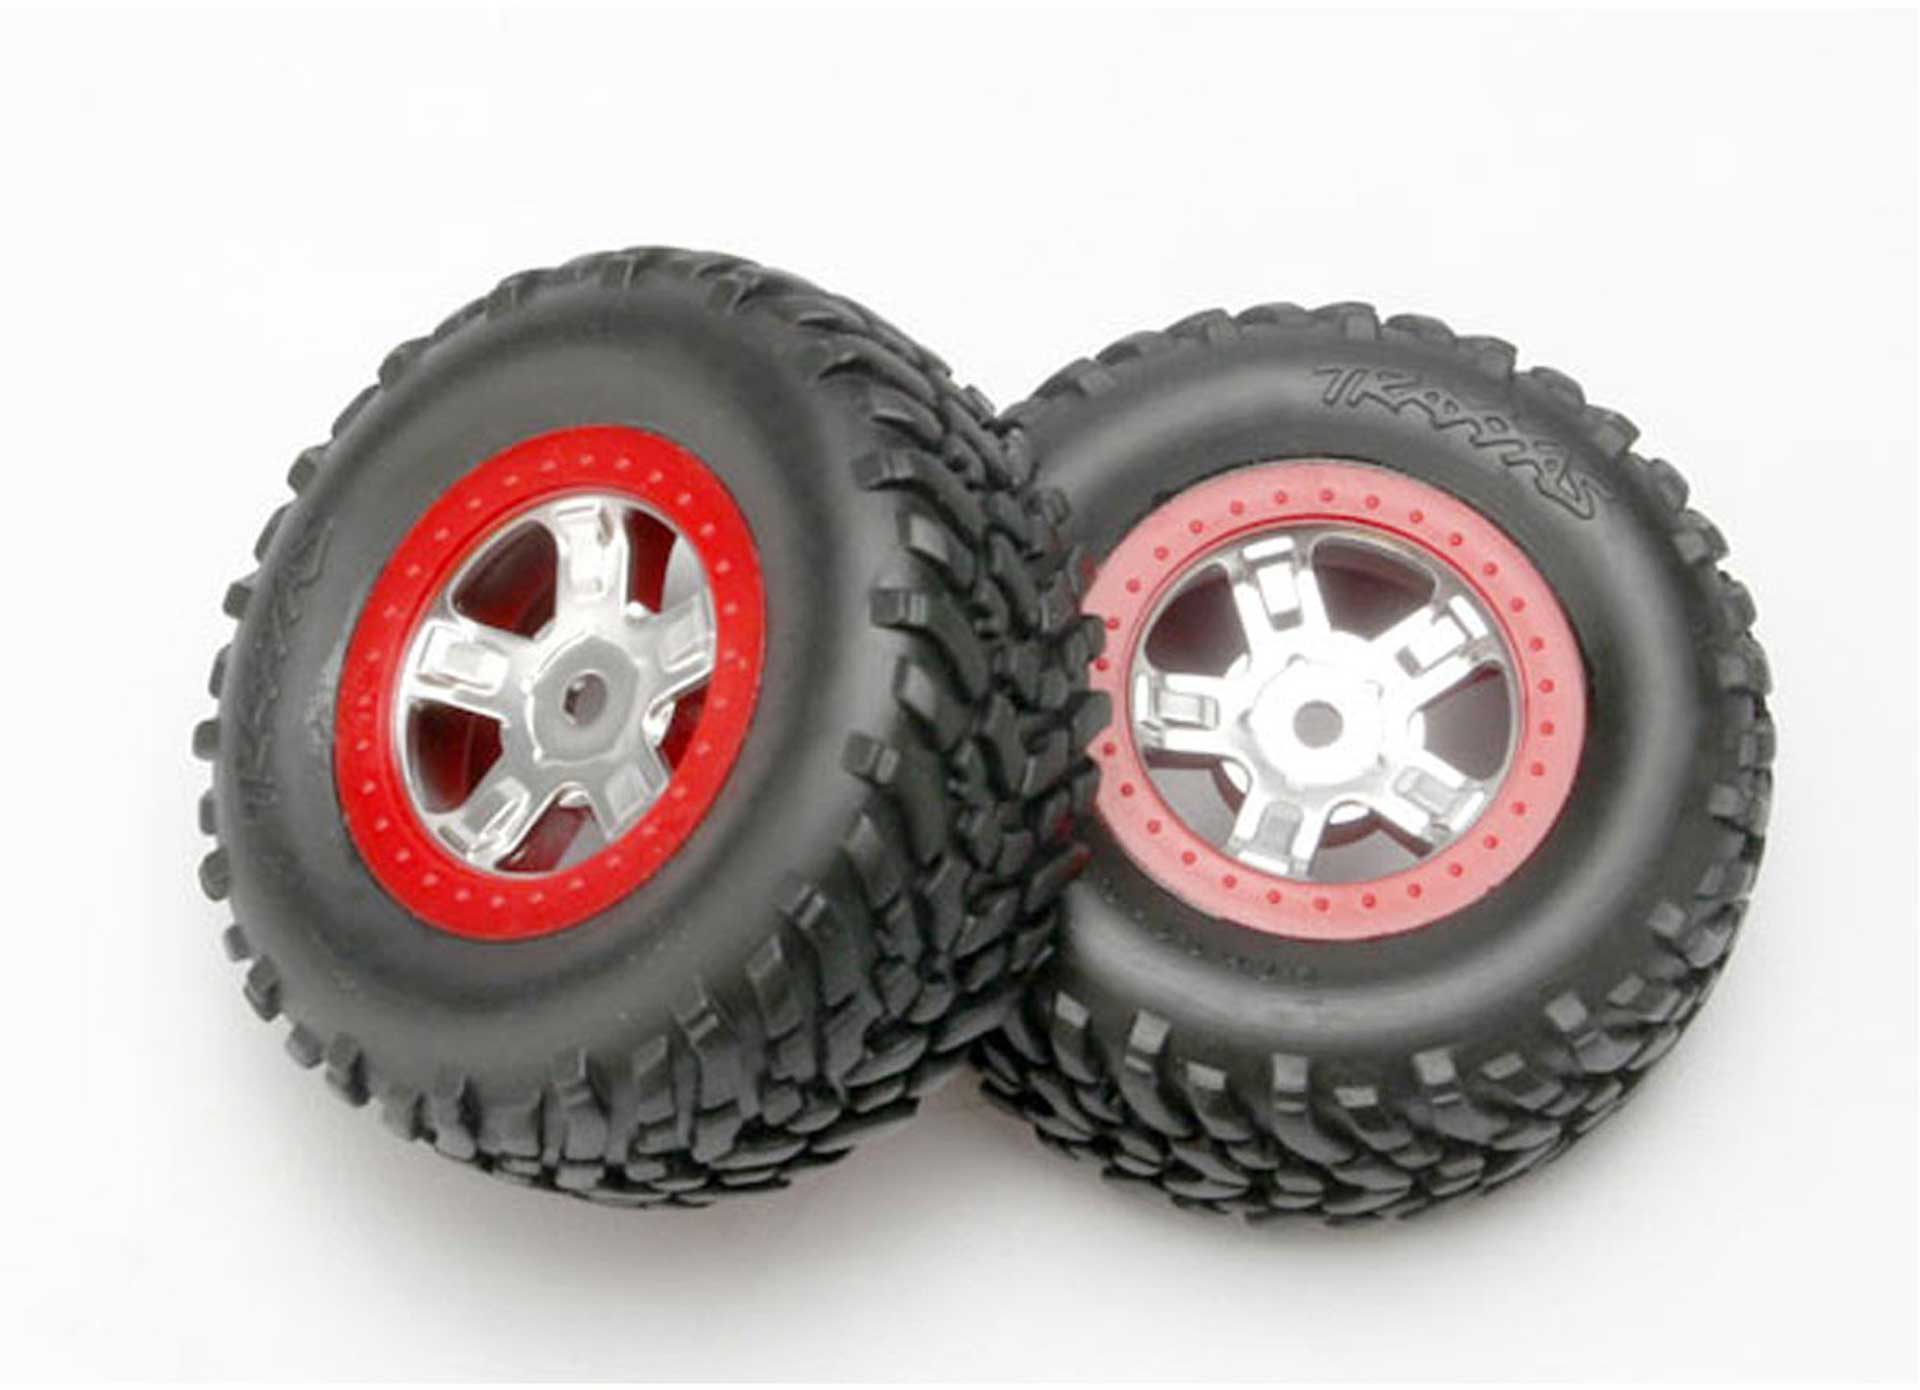 TRAXXAS ROUES MONTEES COLLEES SCT JANTES ROUGES (2)